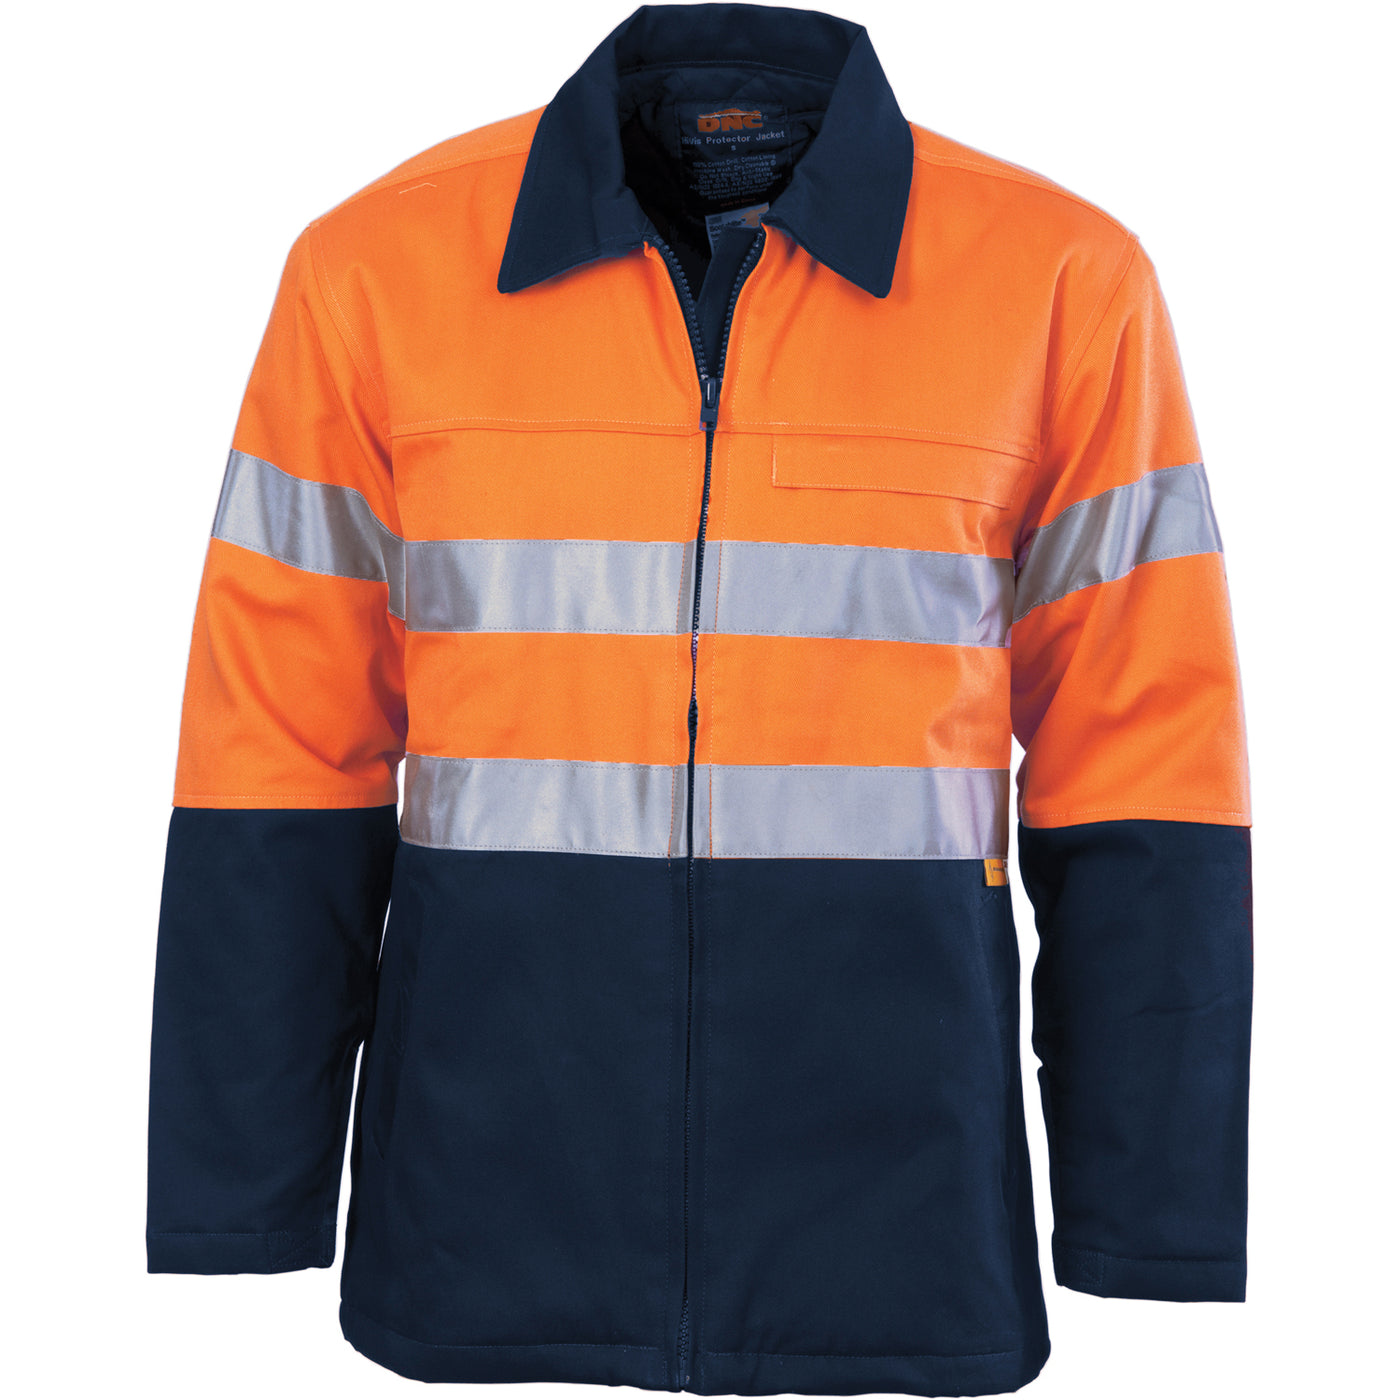 3858 - Hi Vis Two Tone Protect or Drill Jacket with 3M R/ Tape – Border ...